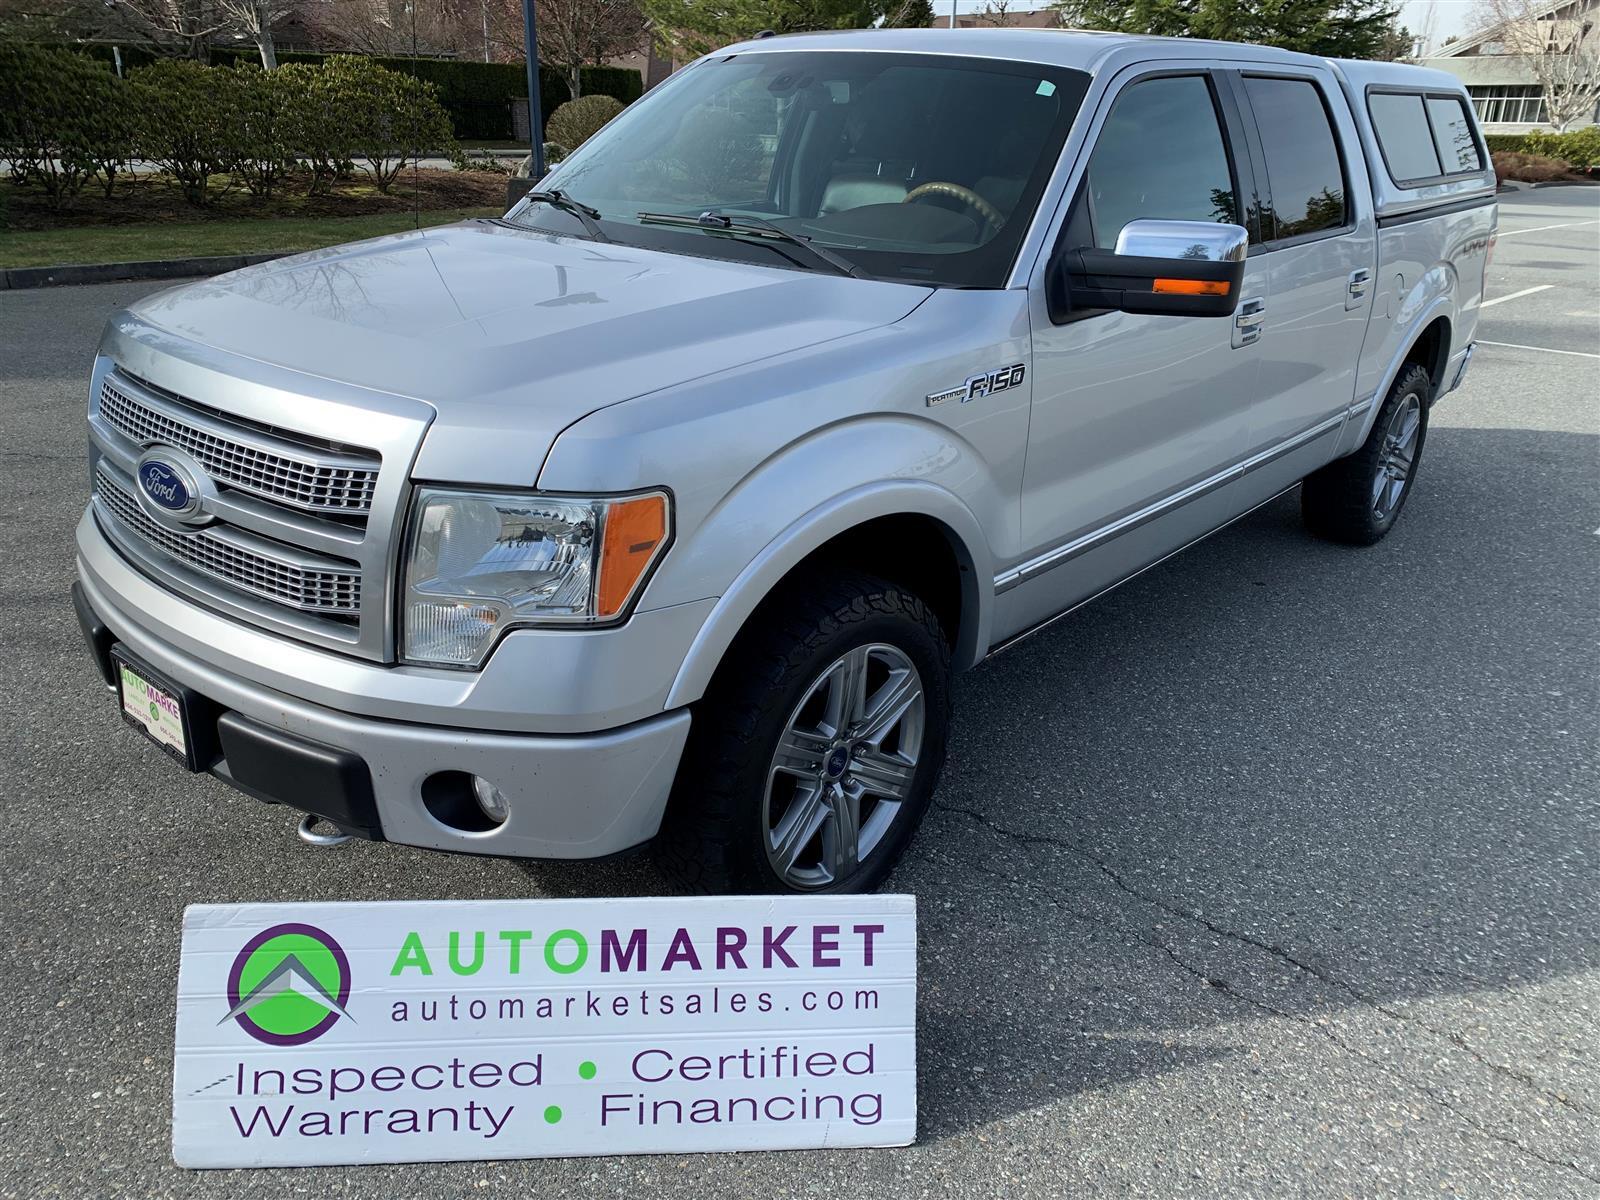 2010 Ford F-150 PLATINUM, LOW KM, FINANCING, WARRANTY, INSPECTED W